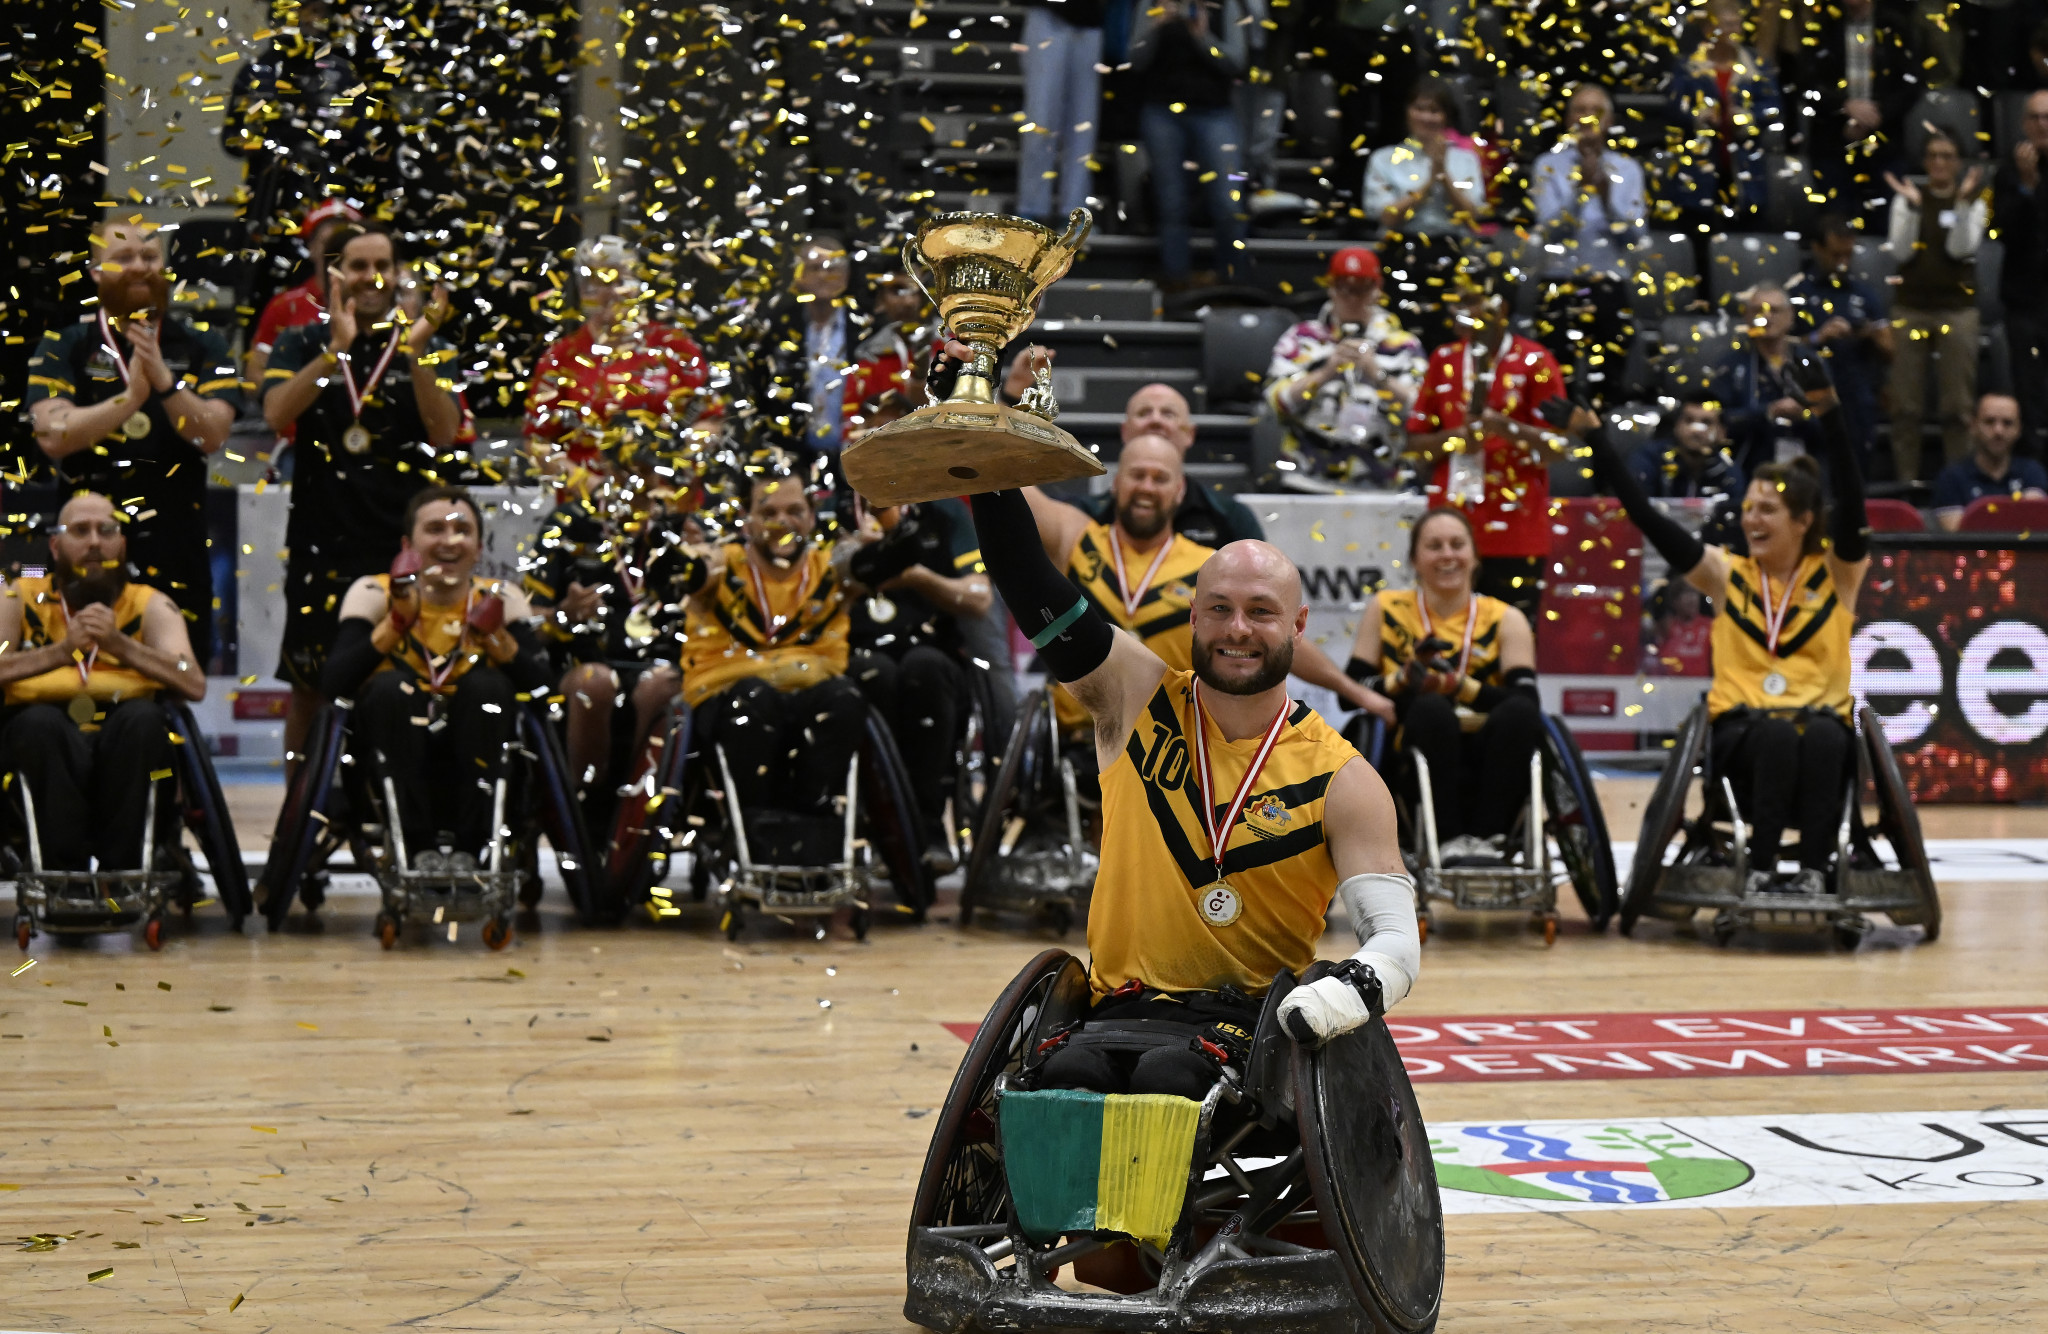 Australia have won the World Wheelchair Rugby Championship for the second time ©Lars Møller/Parasport Denmark